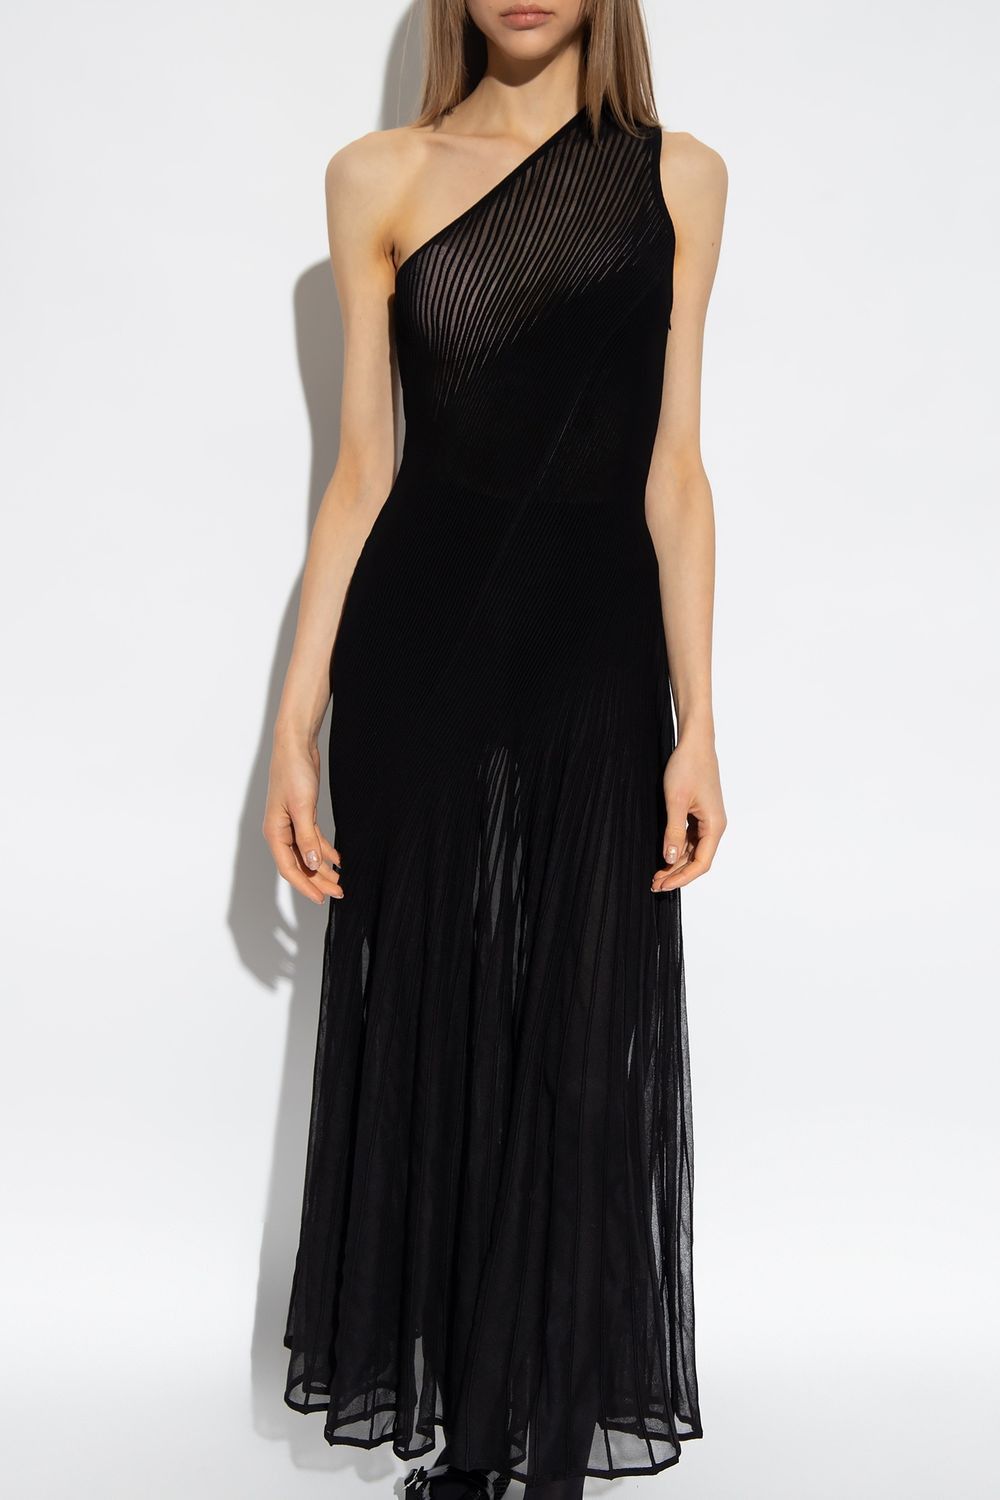 ALAIA Twisted Ribbed One Shoulder Dress for Women - Black